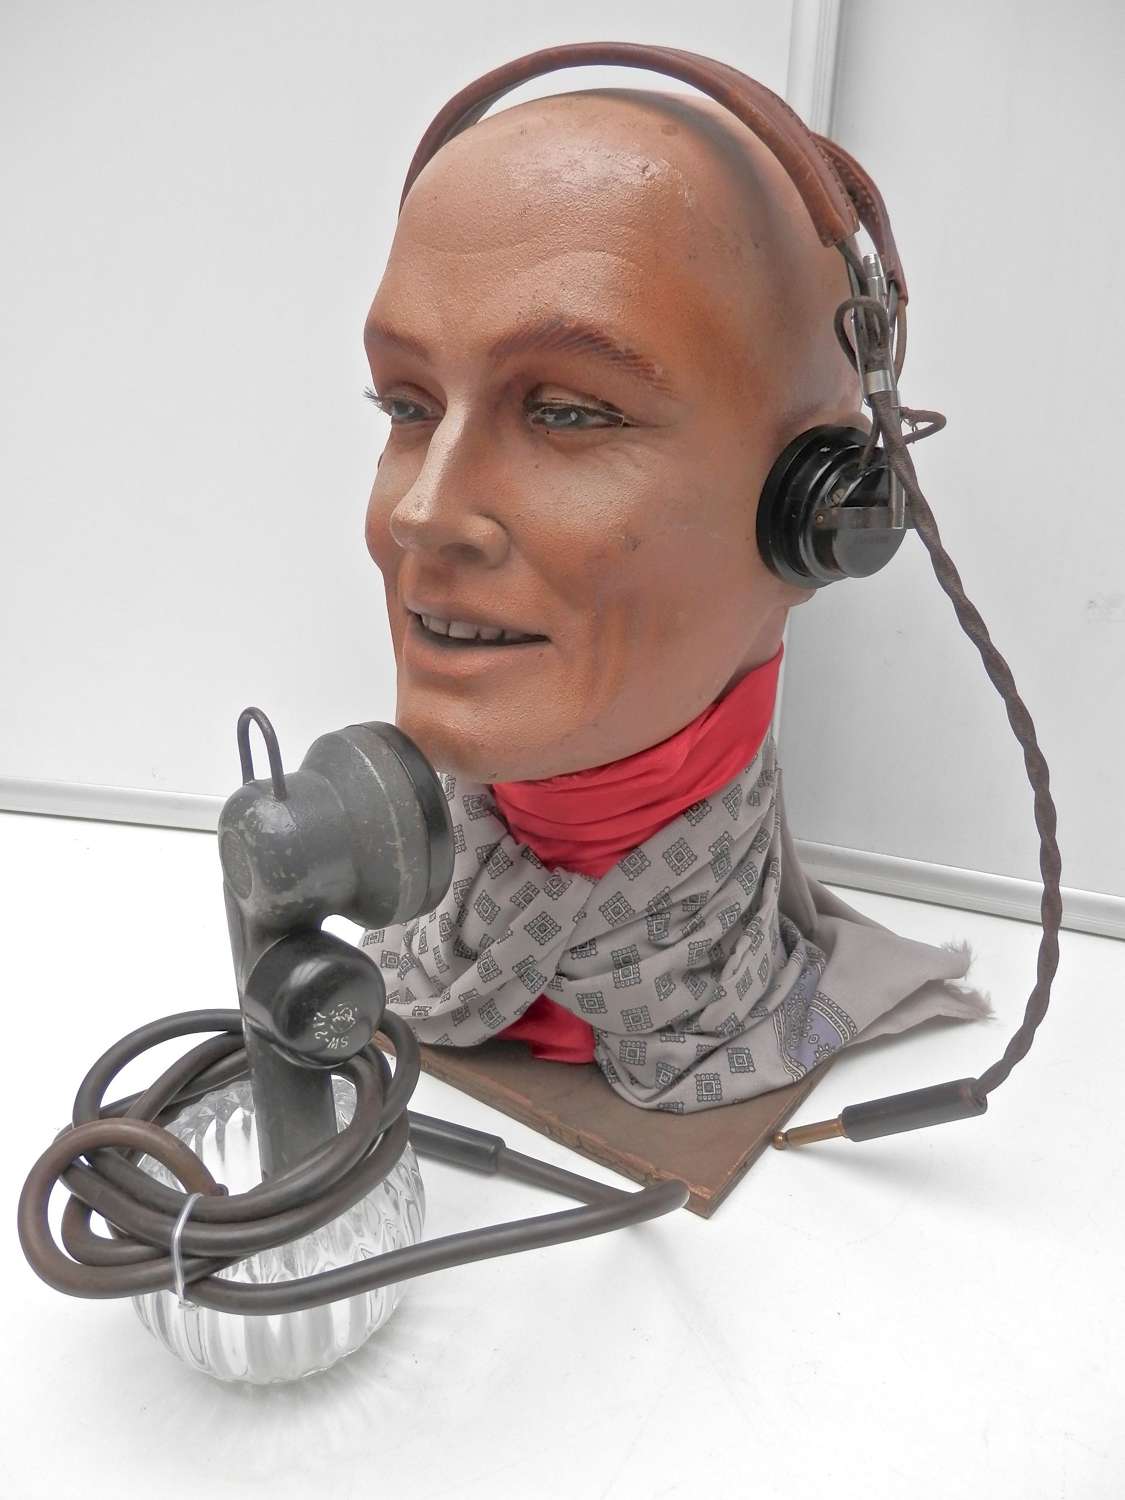 US pilots headset and microphone